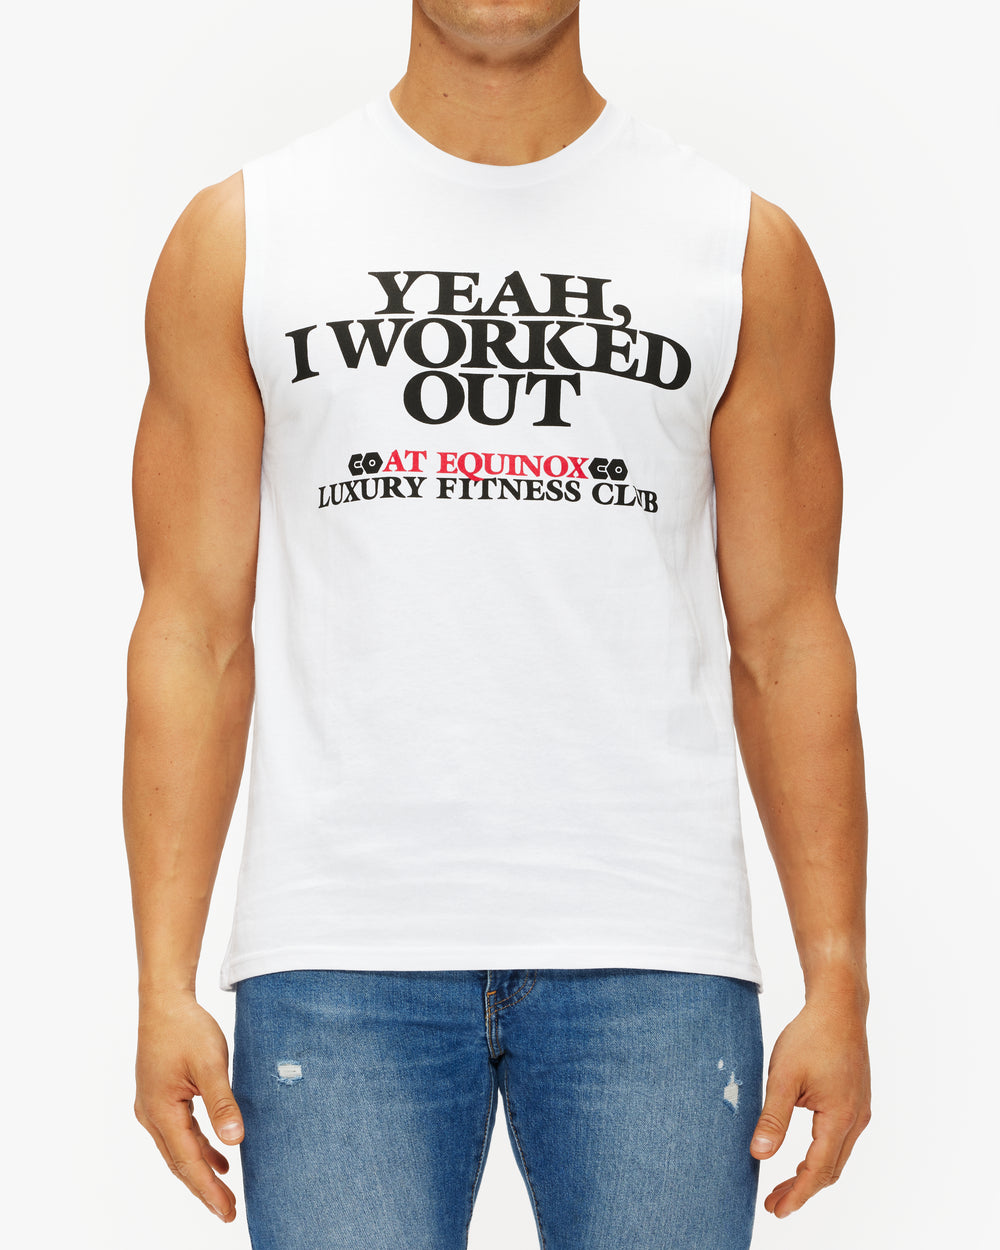 YEAH, I WORK OUT Equinox "It's Not Fitness, It's Life" Muscle Tee